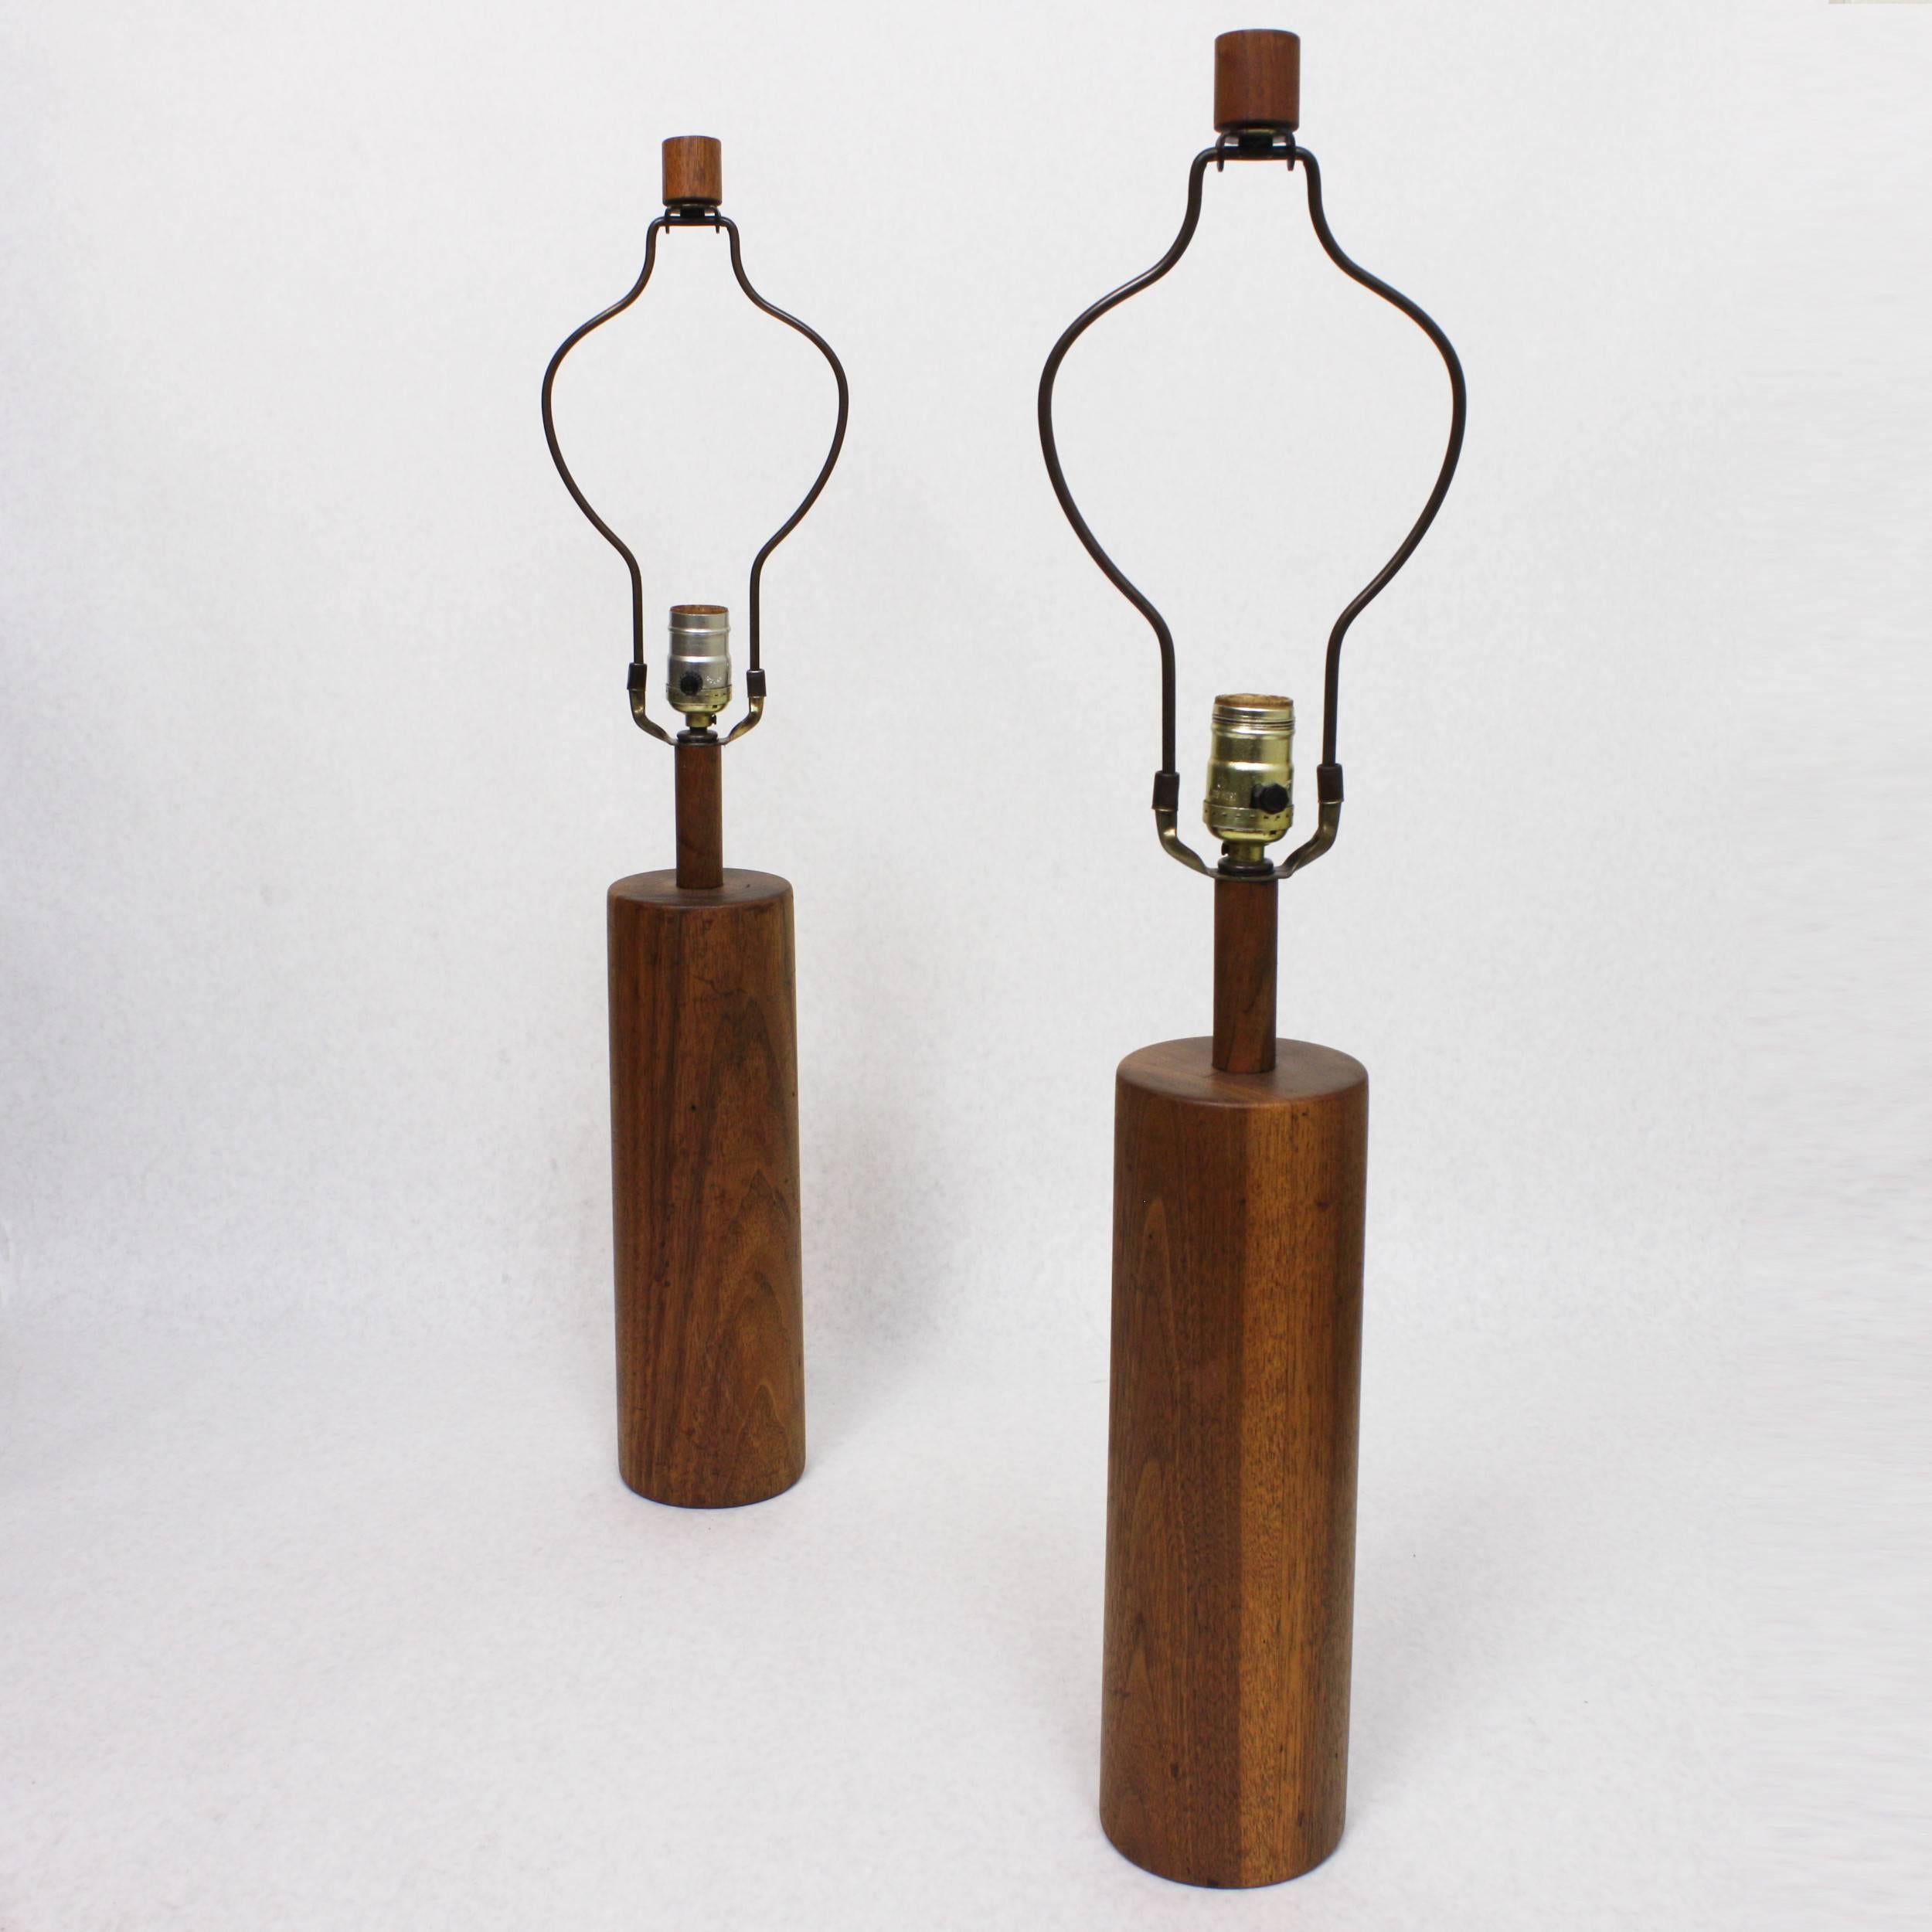 This wonderful set of W31-28 table lamps was designed by Gordon & Jane Martz and manufactured at their Marshall Studios facility in Veedersburg, IN. Lamps feature a turned solid walnut body, neck and finial. A wonderful example of handmade